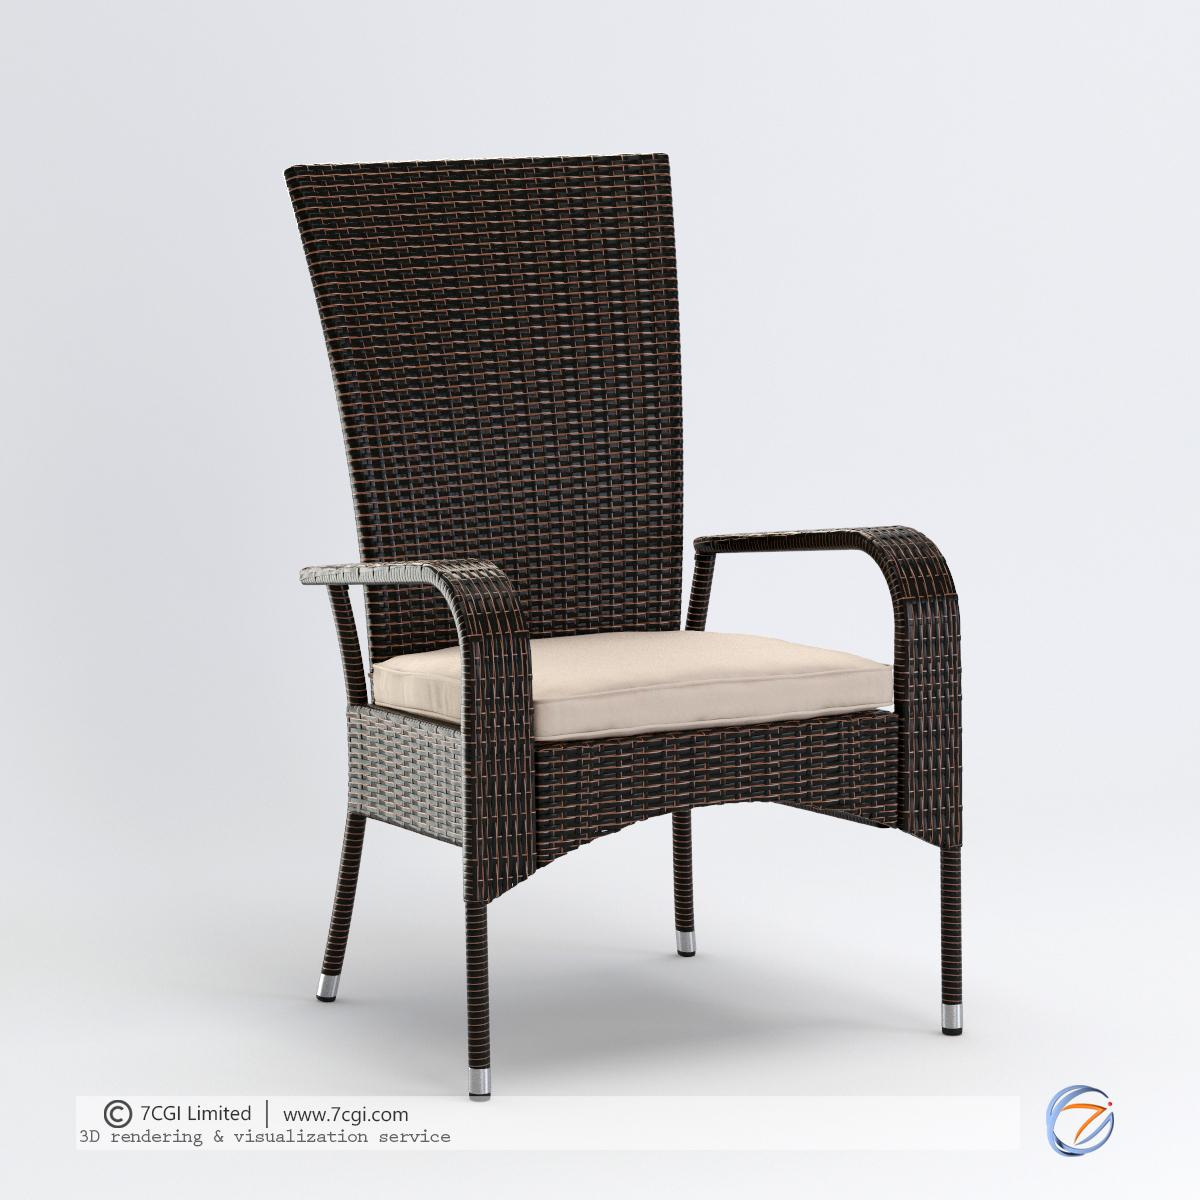 3D rendering of wicker furniture products